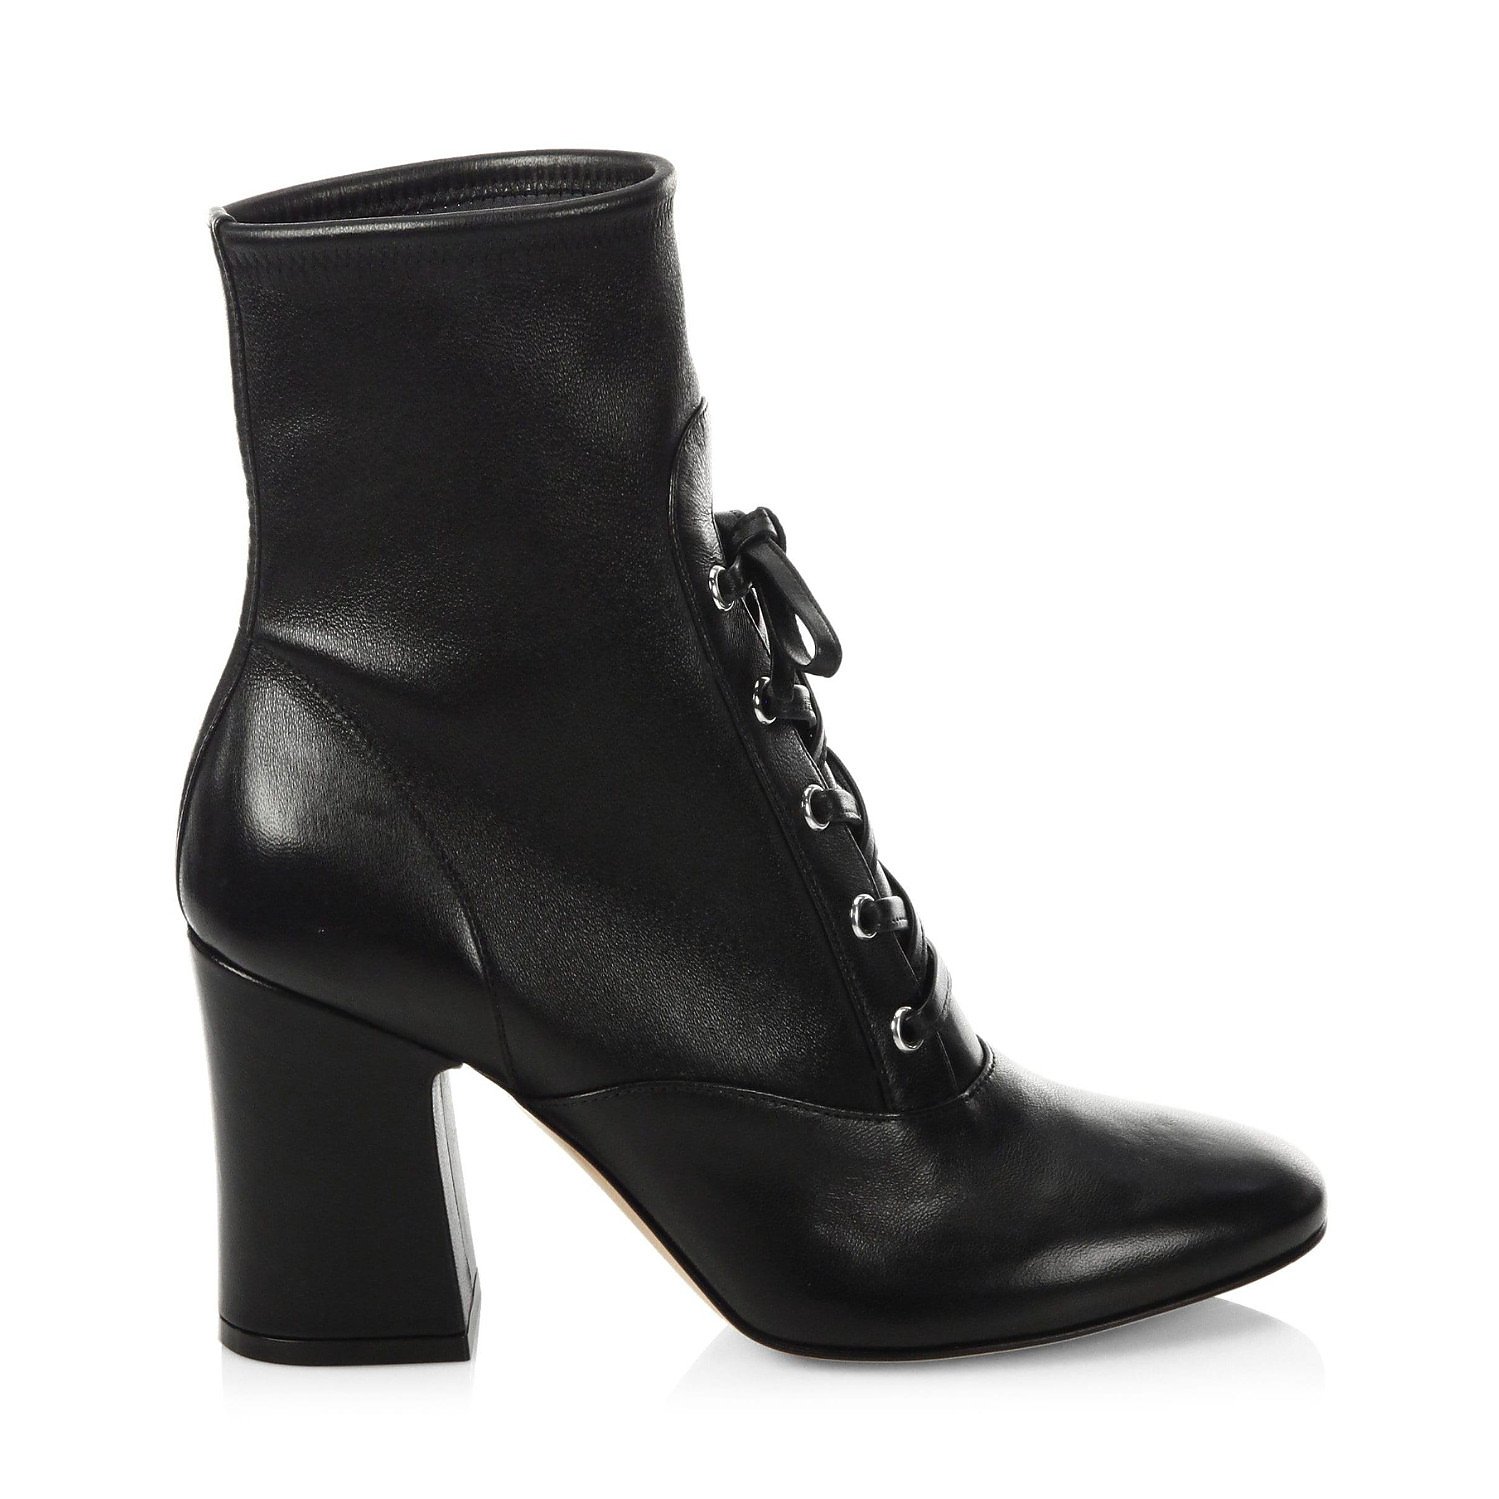 GIANVITO ROSSI Leather Lace-Up Ankle Boots